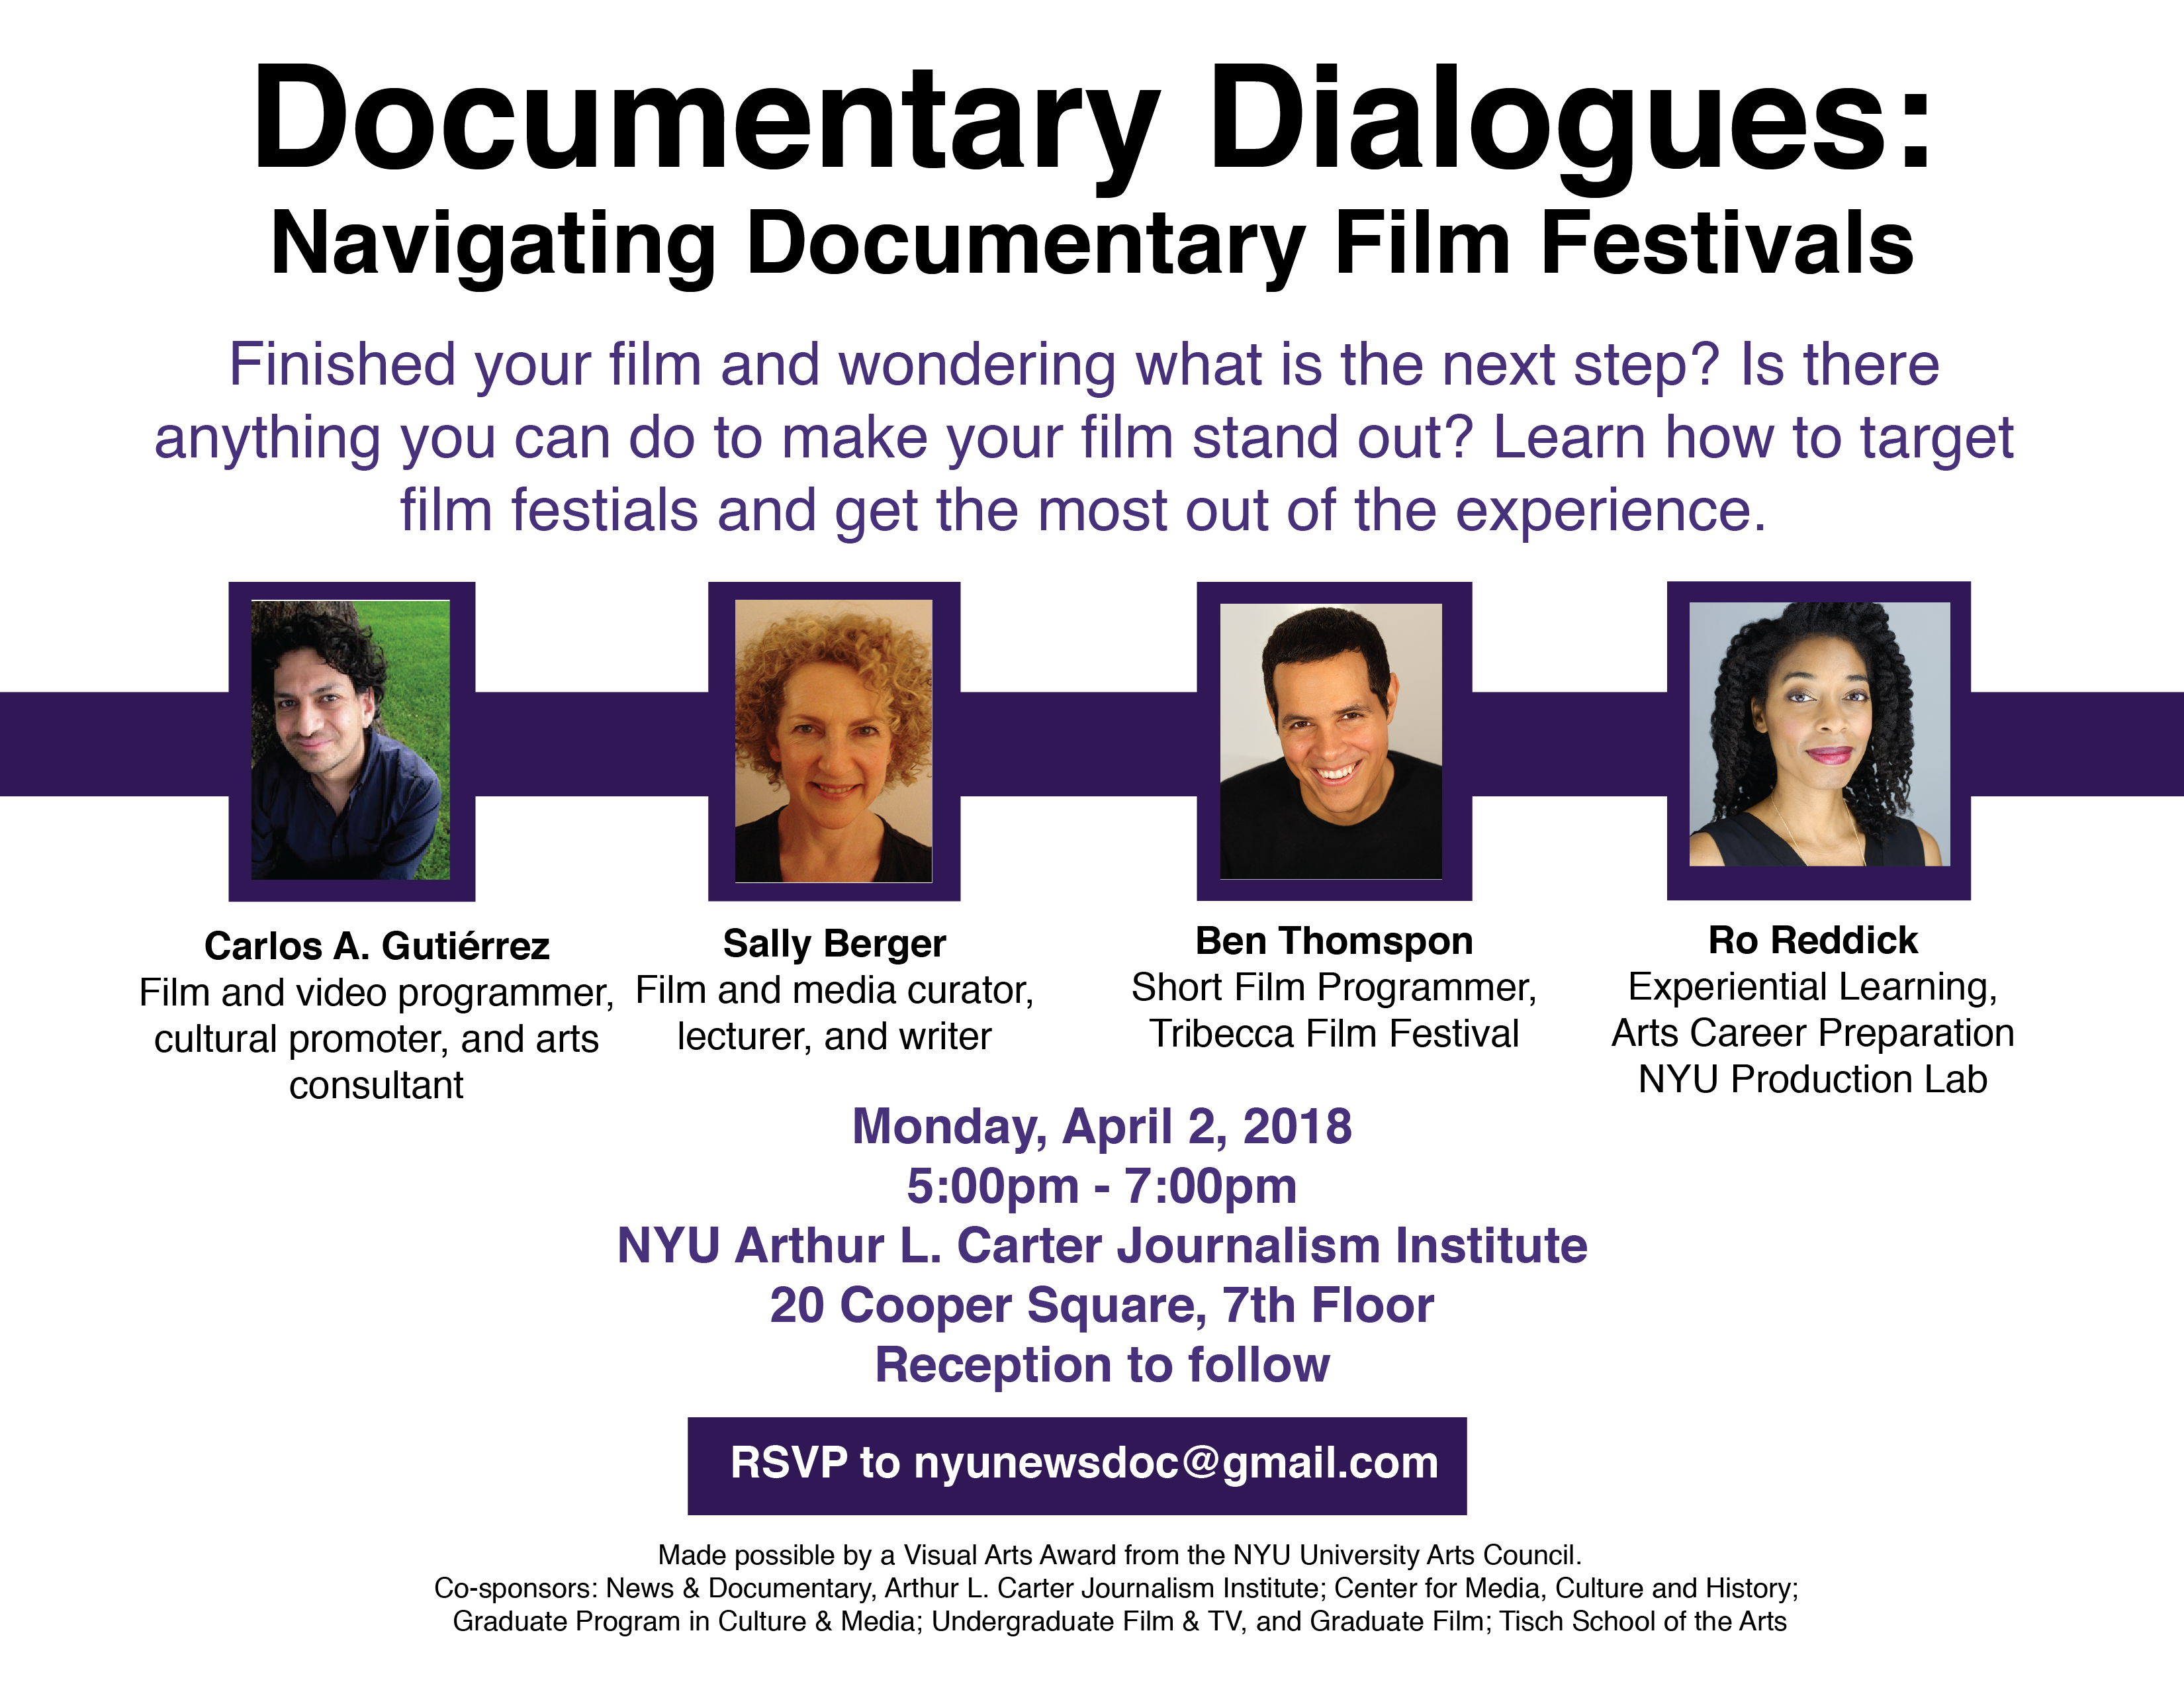 Documentary Dialogues: Navigating Documentary Film Festivals - Event Poster 2018